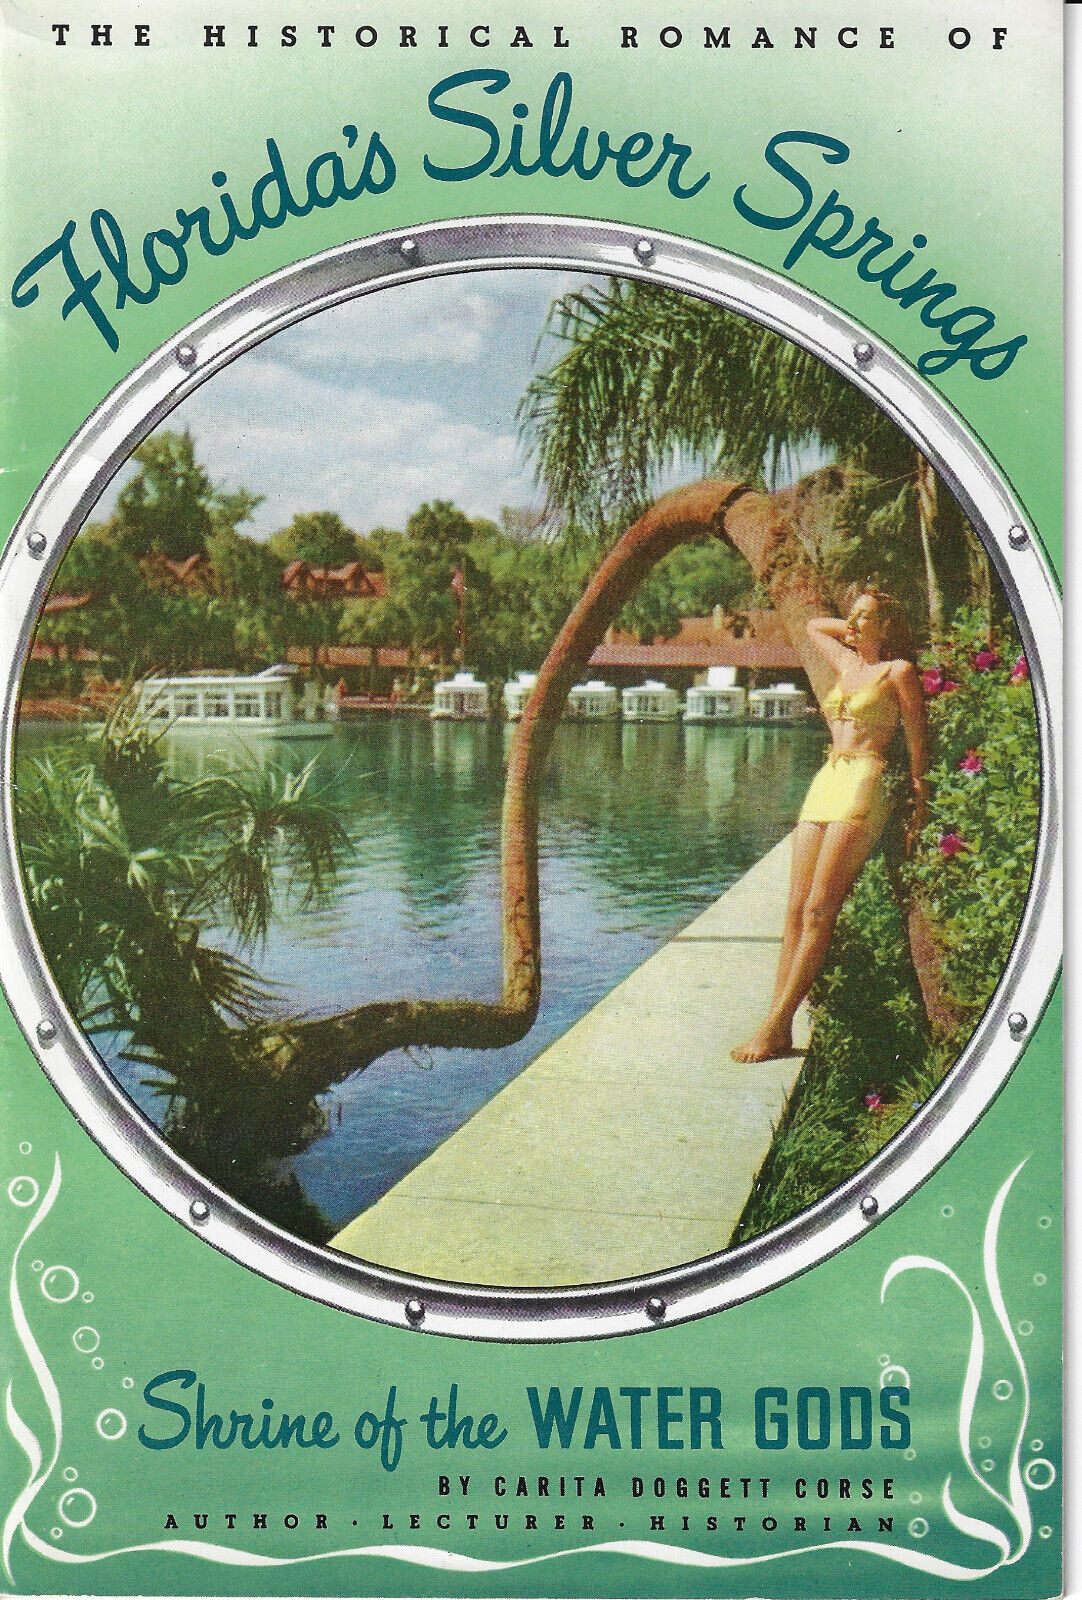 CA 1950s BOOKLET FOR FLORIDA\'S SILVER SPRINGS